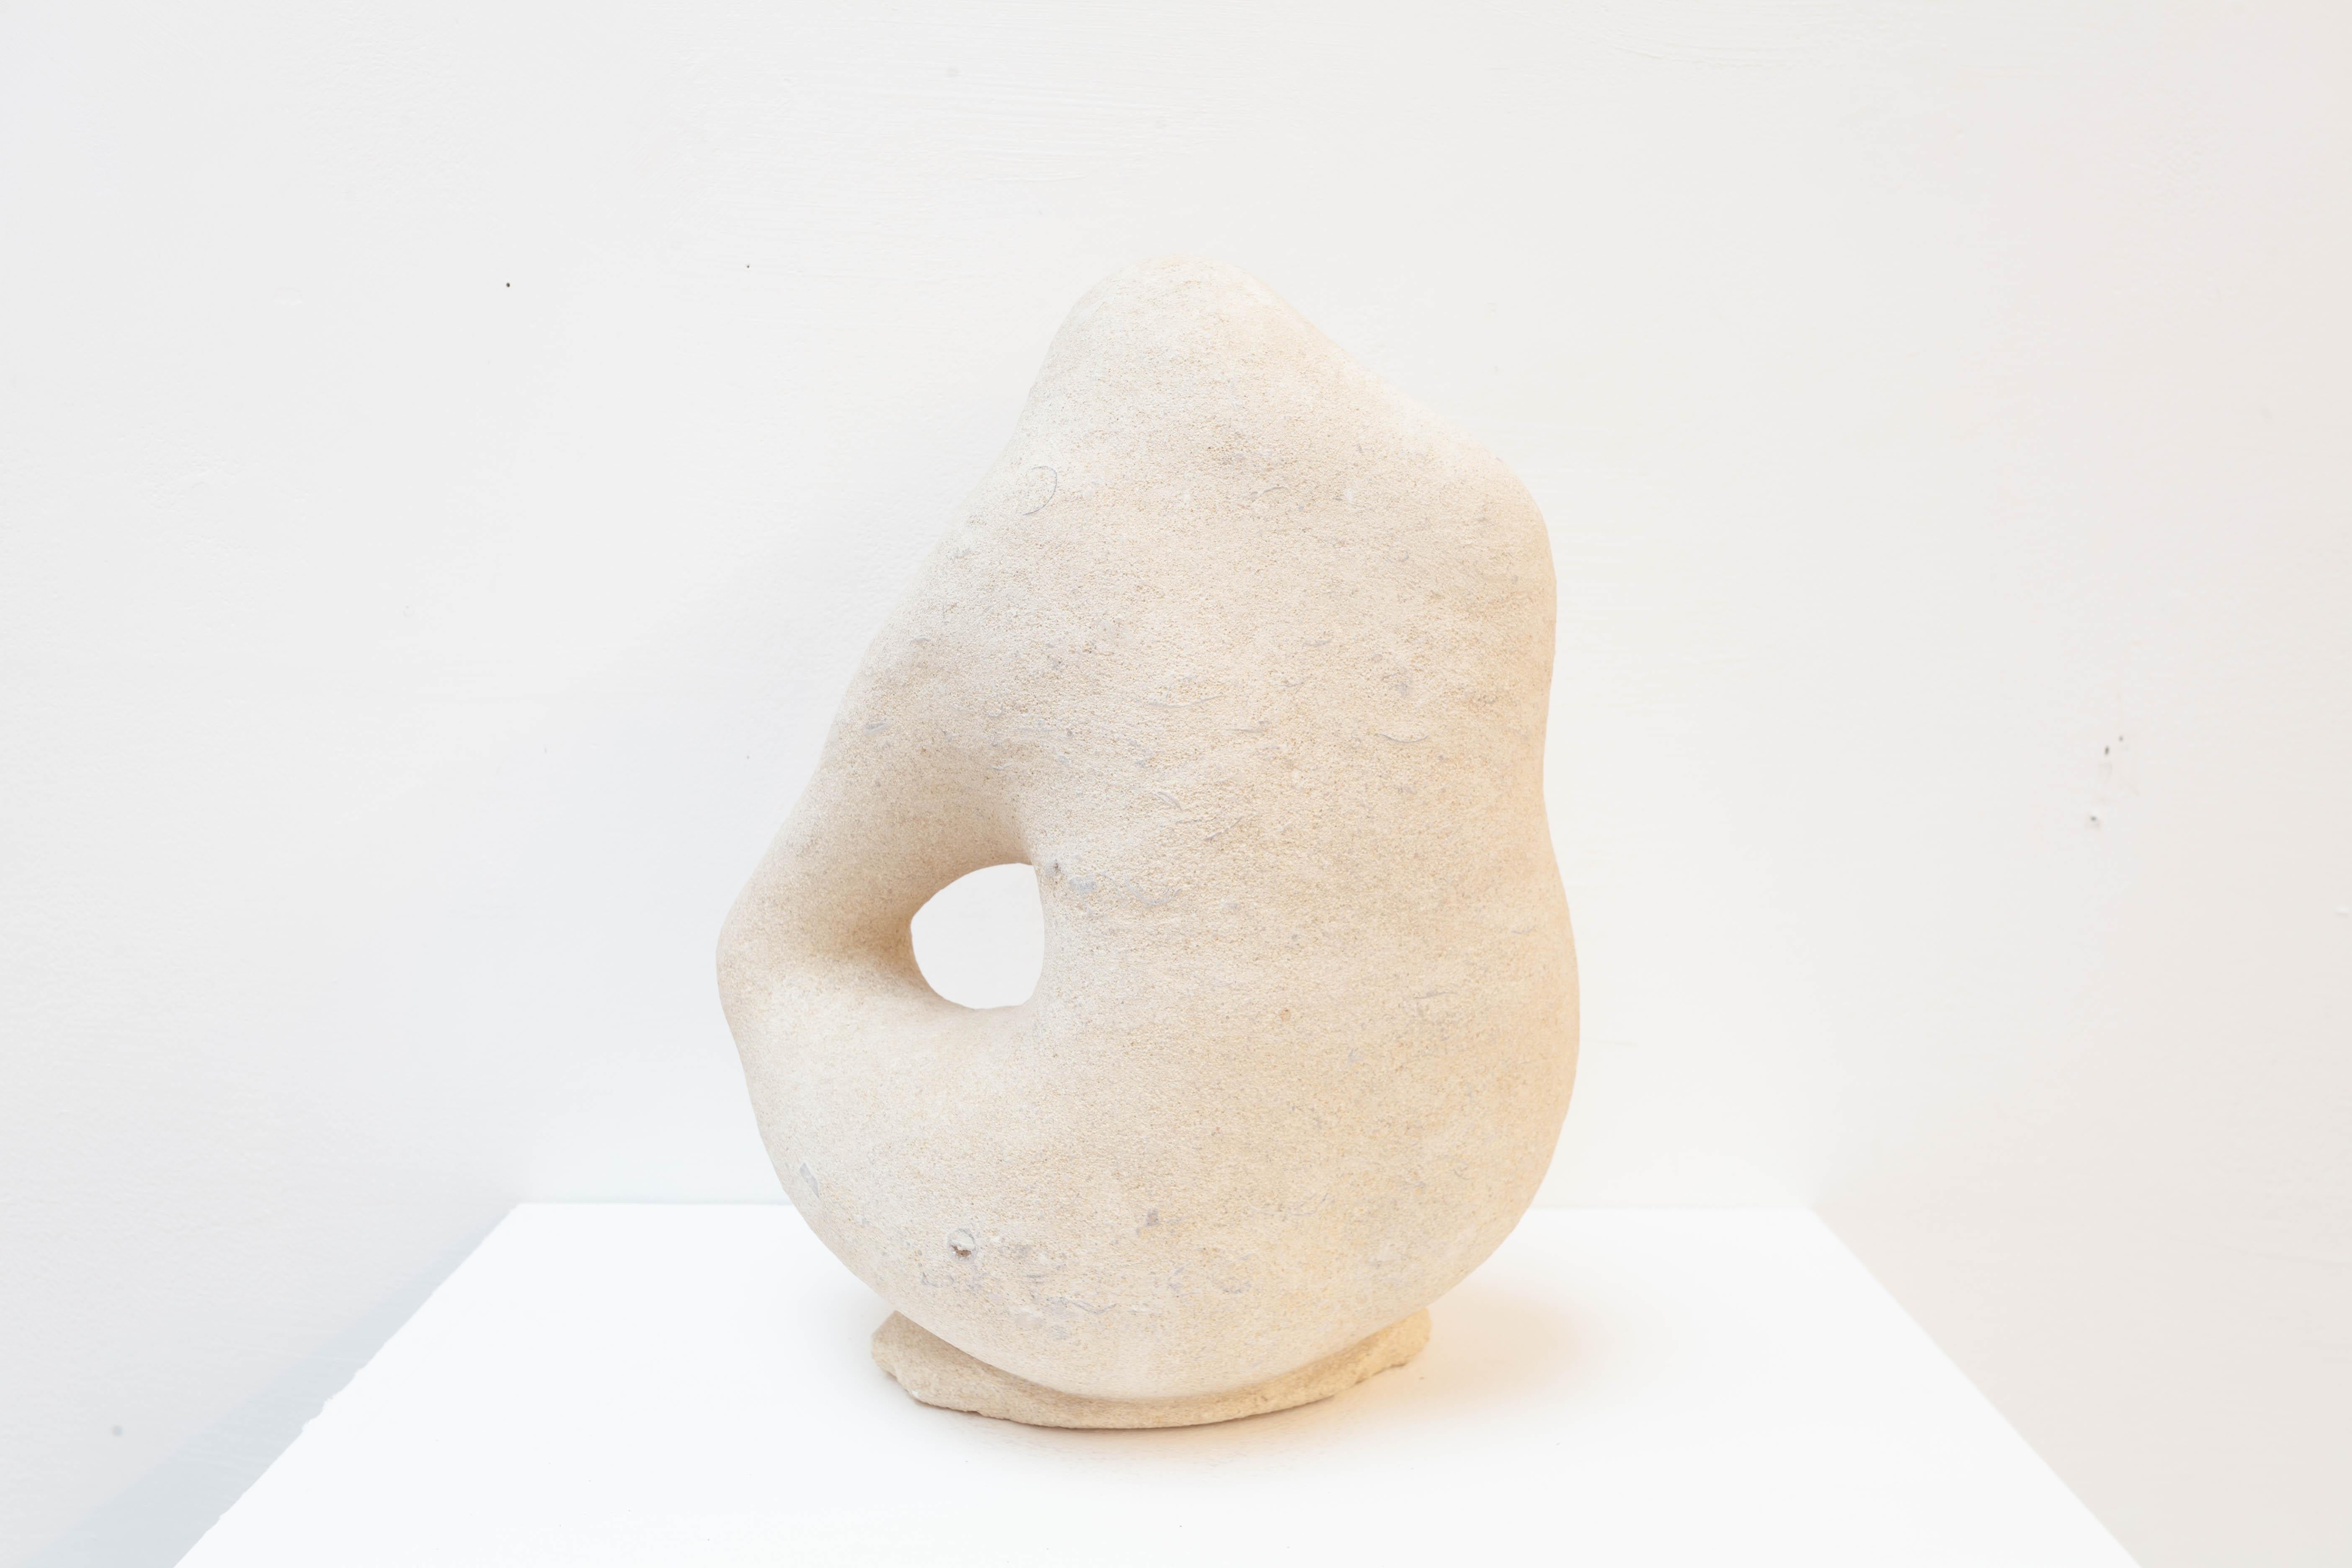 Hand Carved Limestone.

From her earliest experiments in art Alison has found the variety and beauty of the human form endlessly fascinating and life-drawing was her first love. For her the human element is vital. 

It was whilst training as an Art